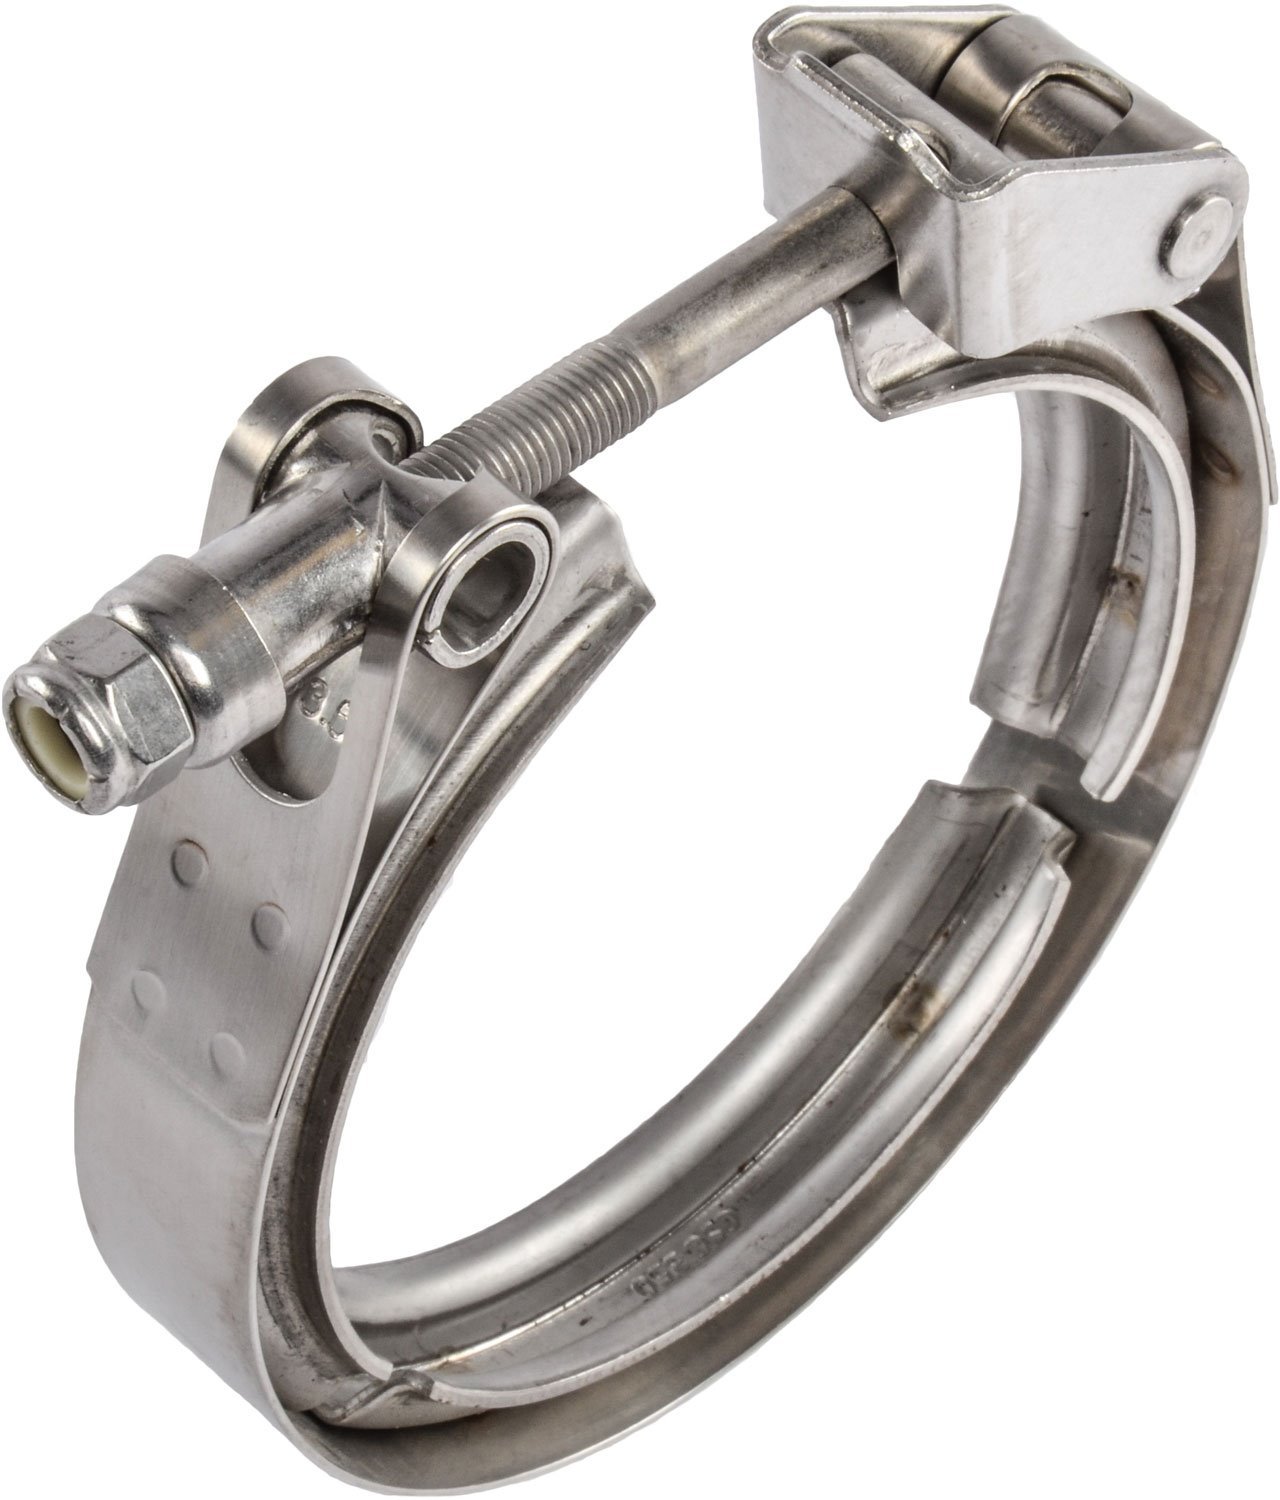 Stainless Steel Quick Release V-Band Clamp 2.500 in.